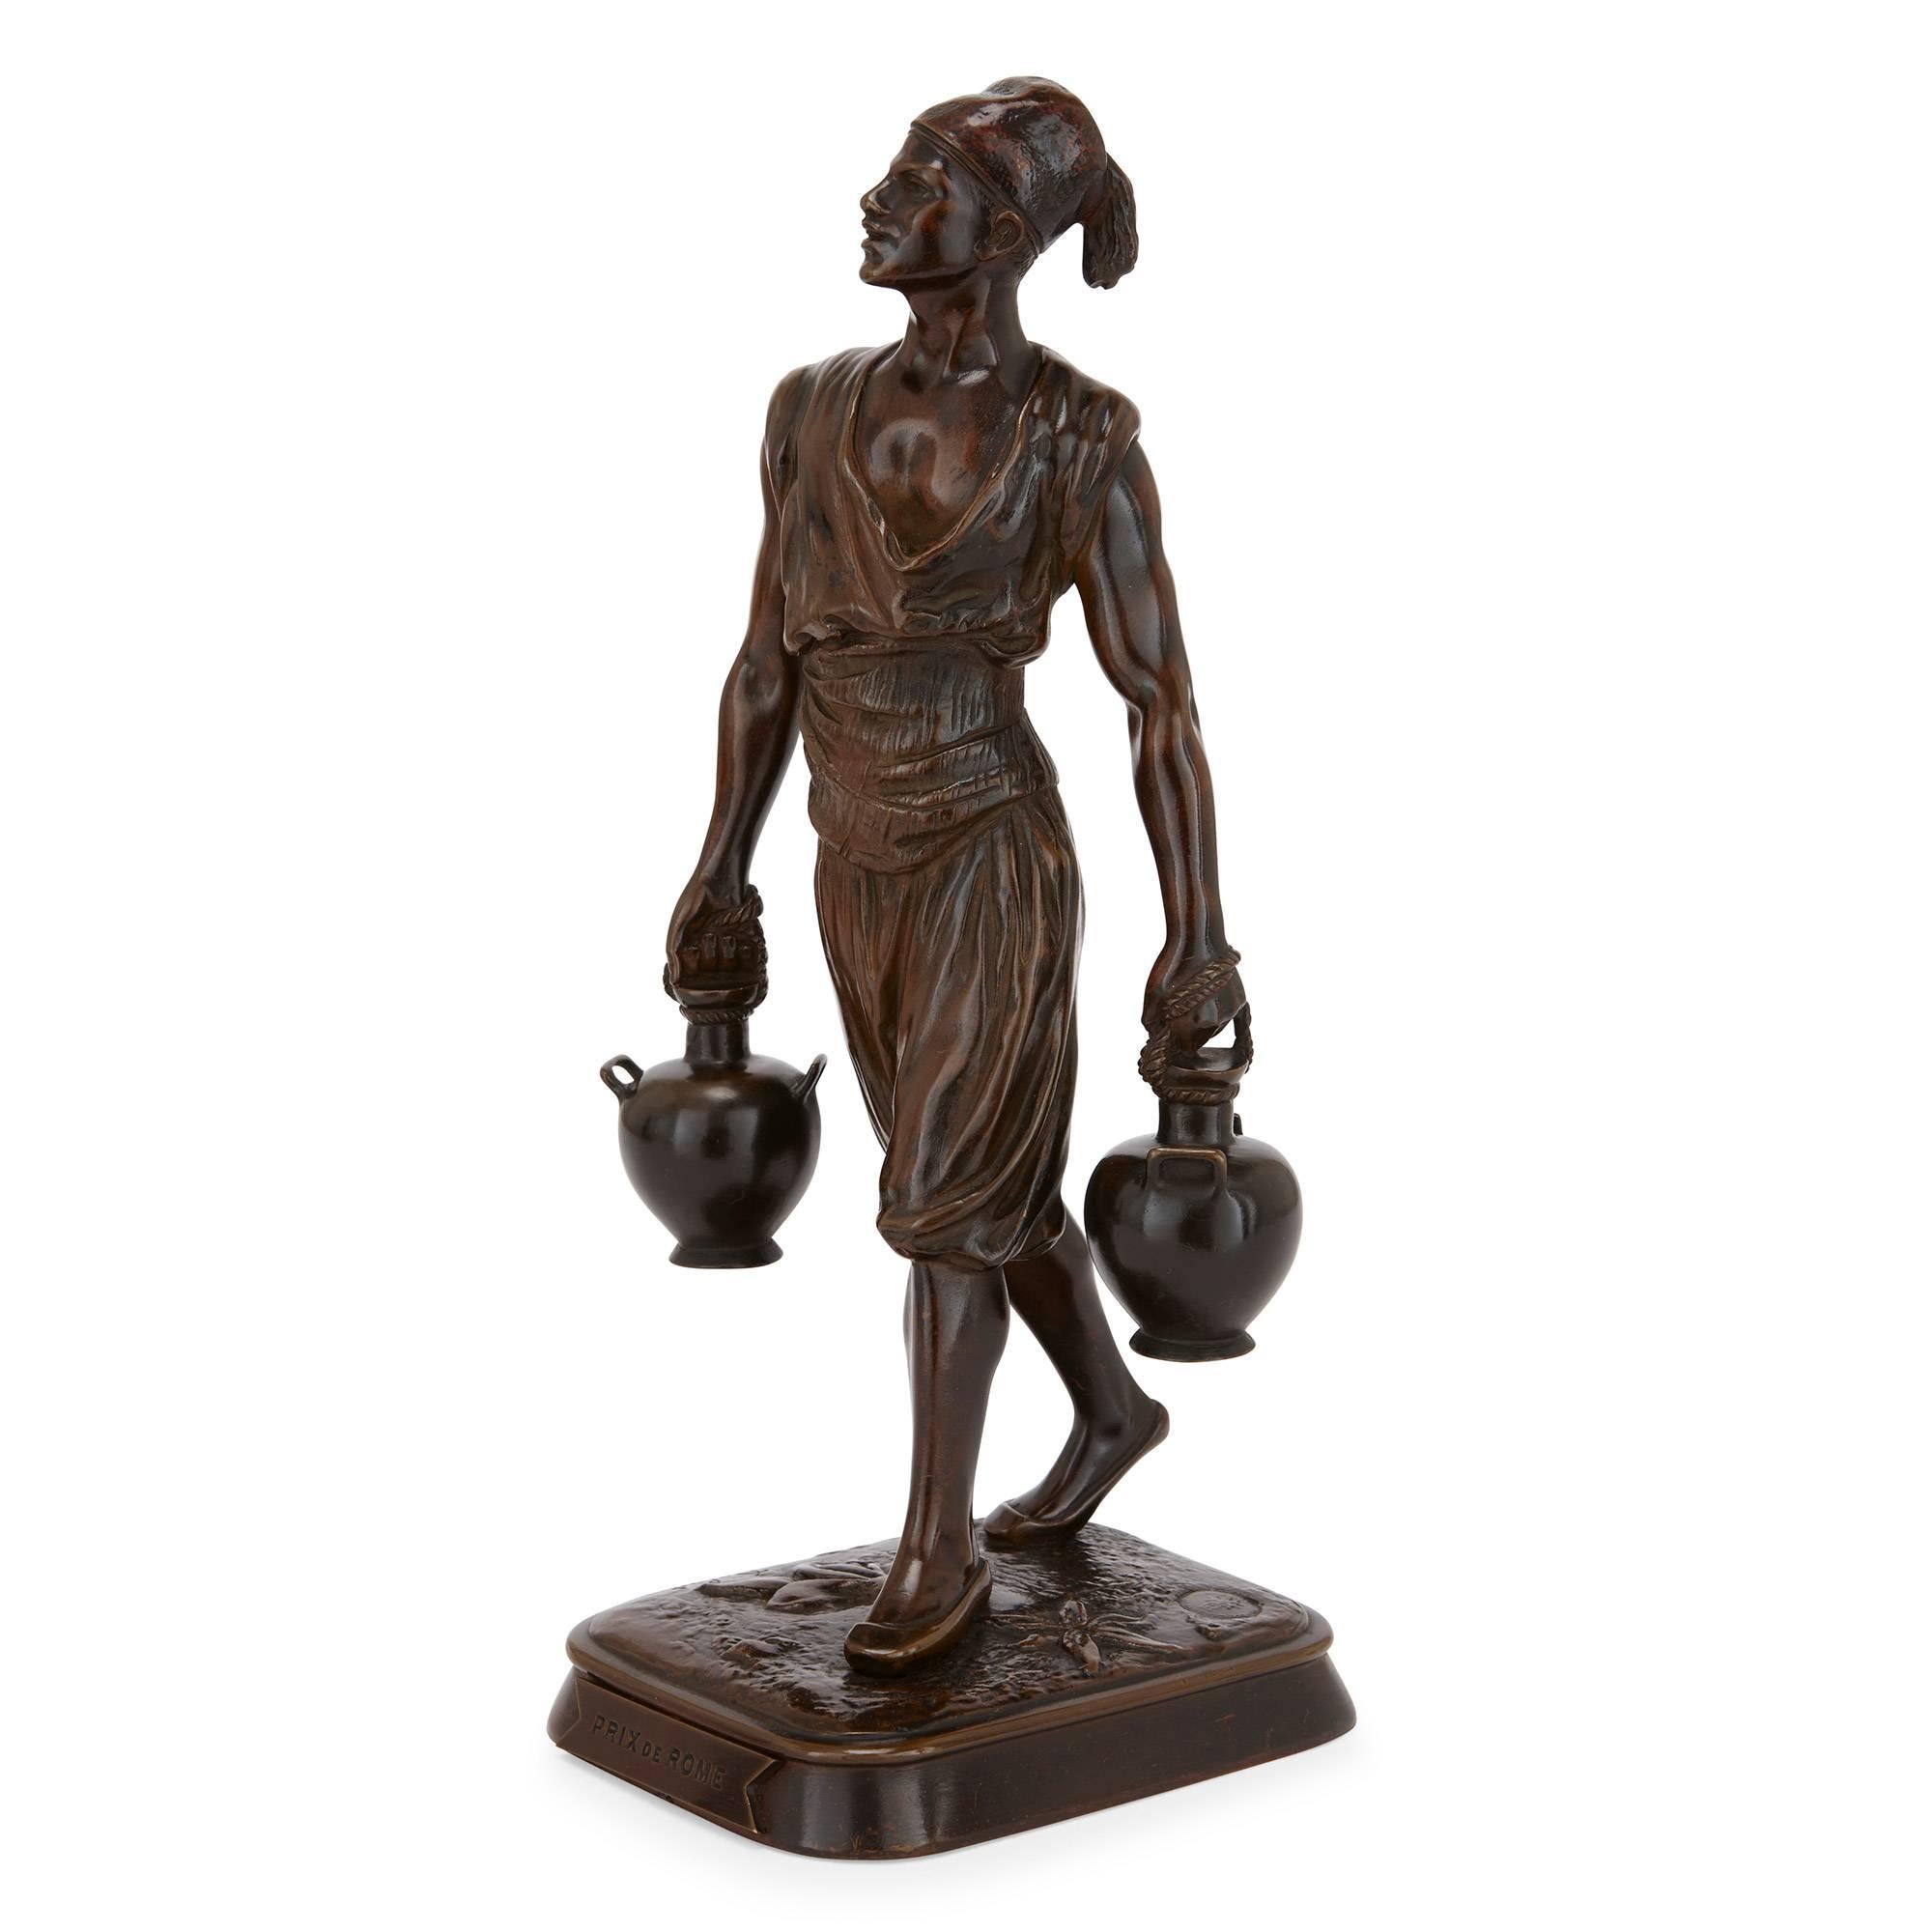 These charming antique Orientalist style figures were crafted by prestigious French makers Emile Pinedo (French, 1840-1916) and Marcel Debut (French, 1865-1933). One figure is modelled in the form of a Tunisian water carrier and the other is